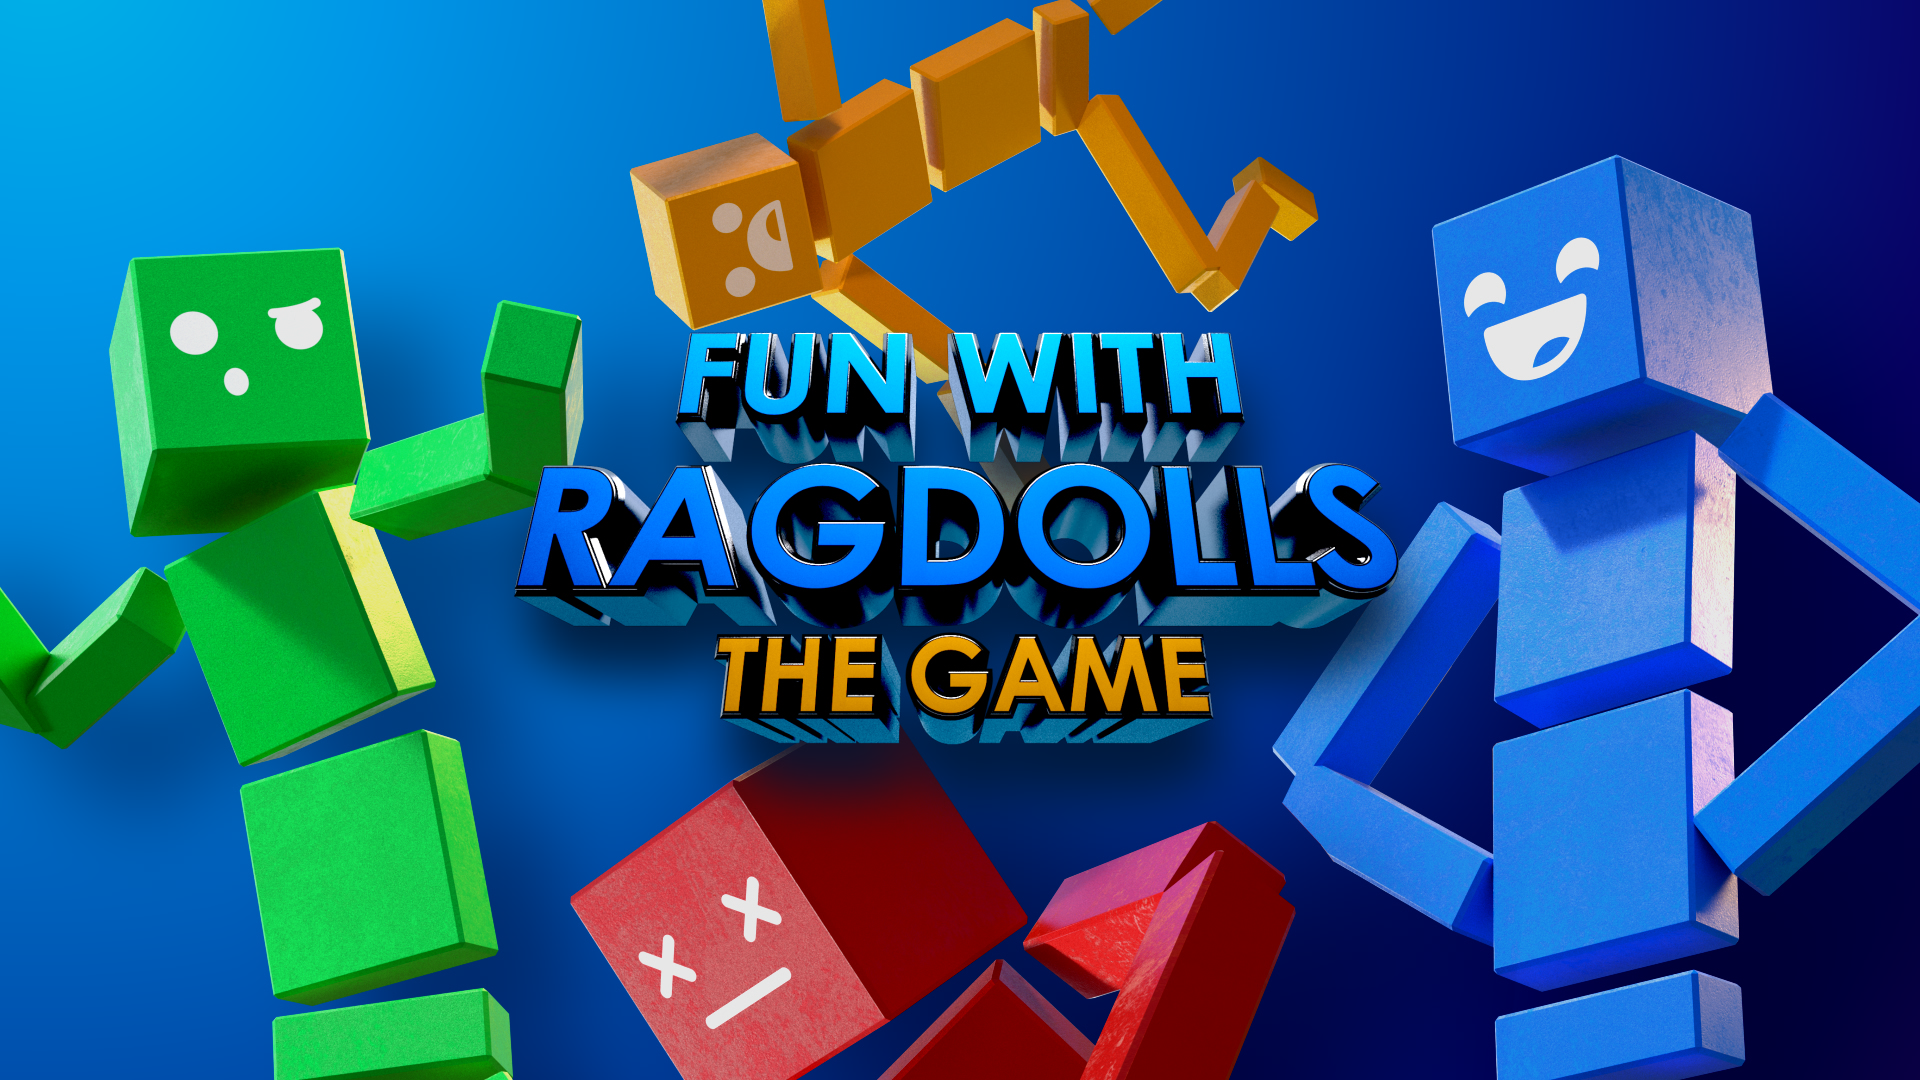 The game is fun. Ragdoll игры. Fun with Ragdolls. Картинки fun with Ragdolls. Fun with Рэгдолл.